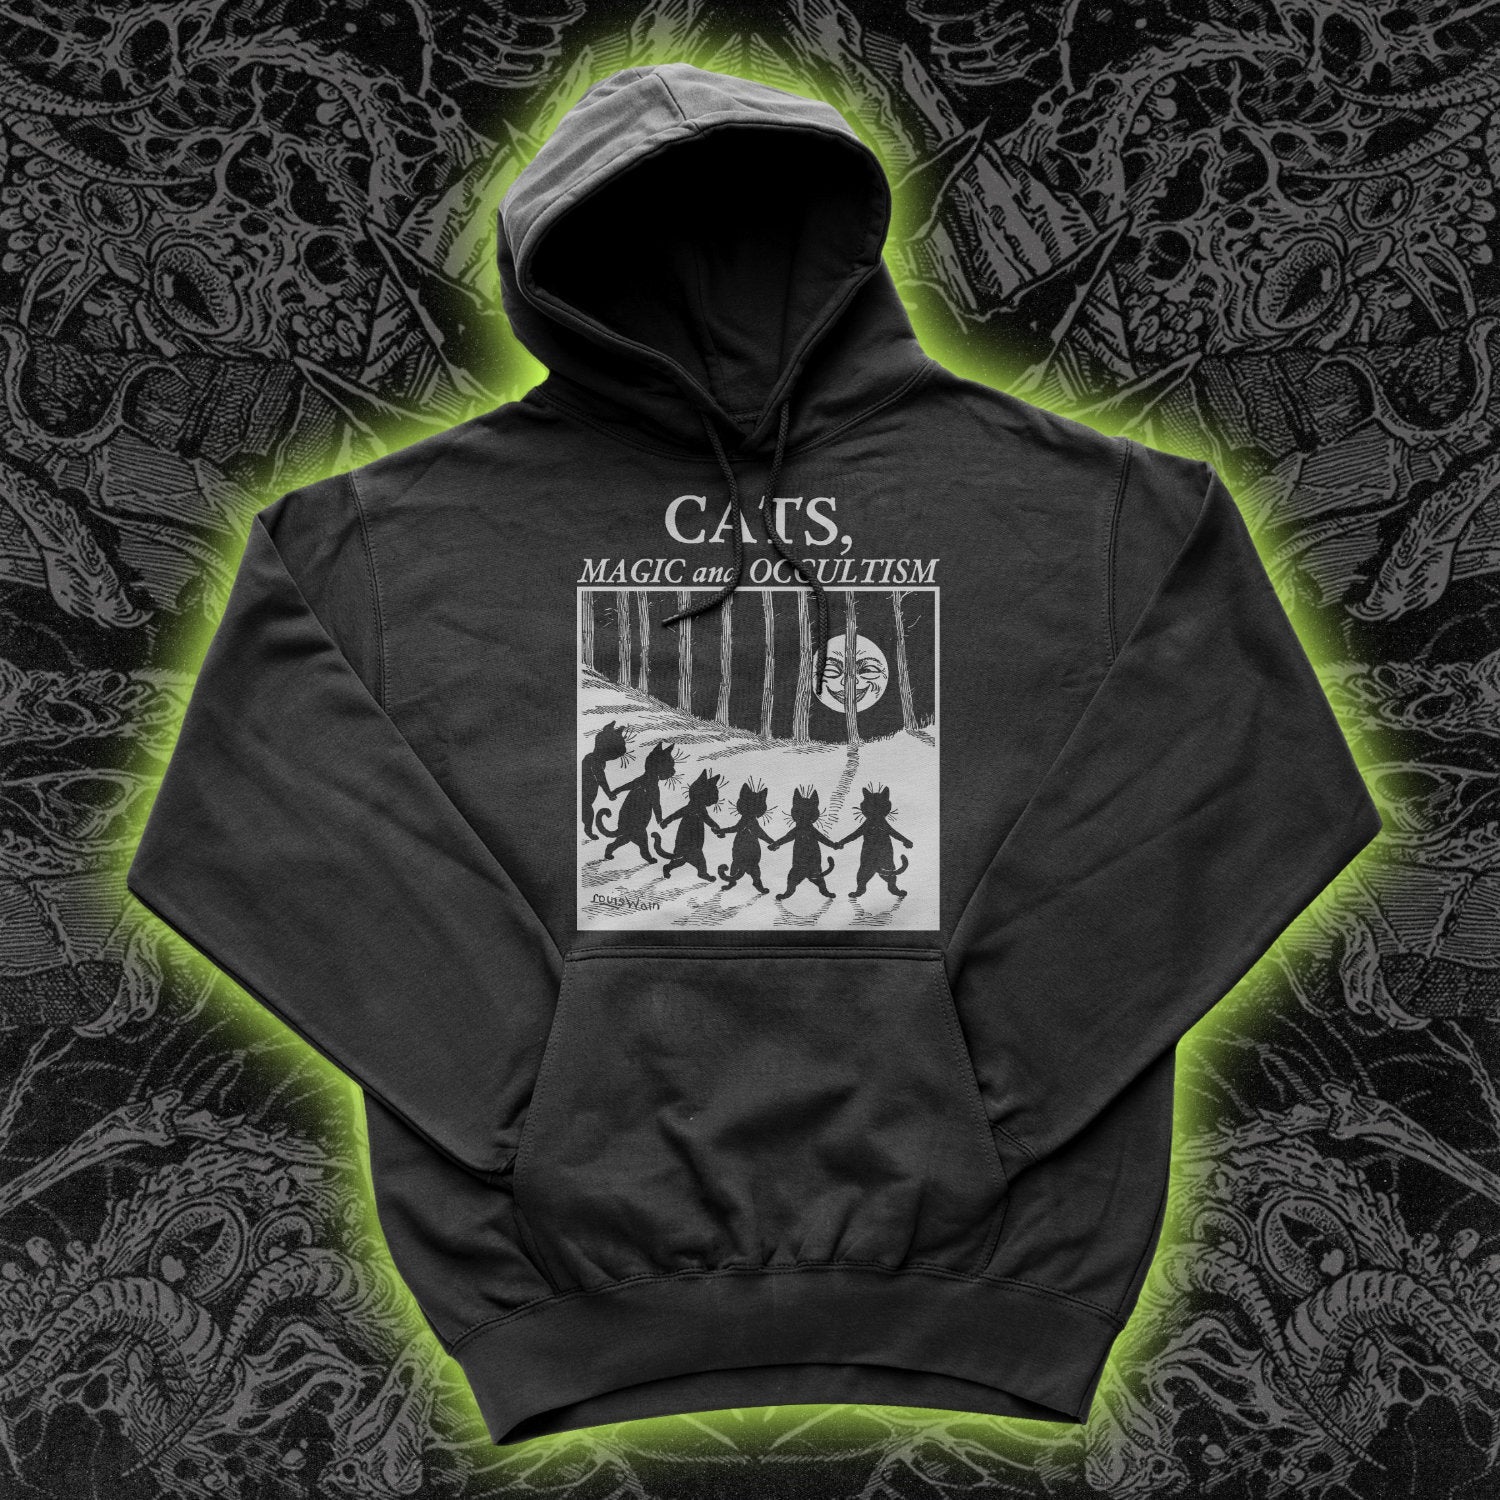 Cats Magic And Occultism Hoodie